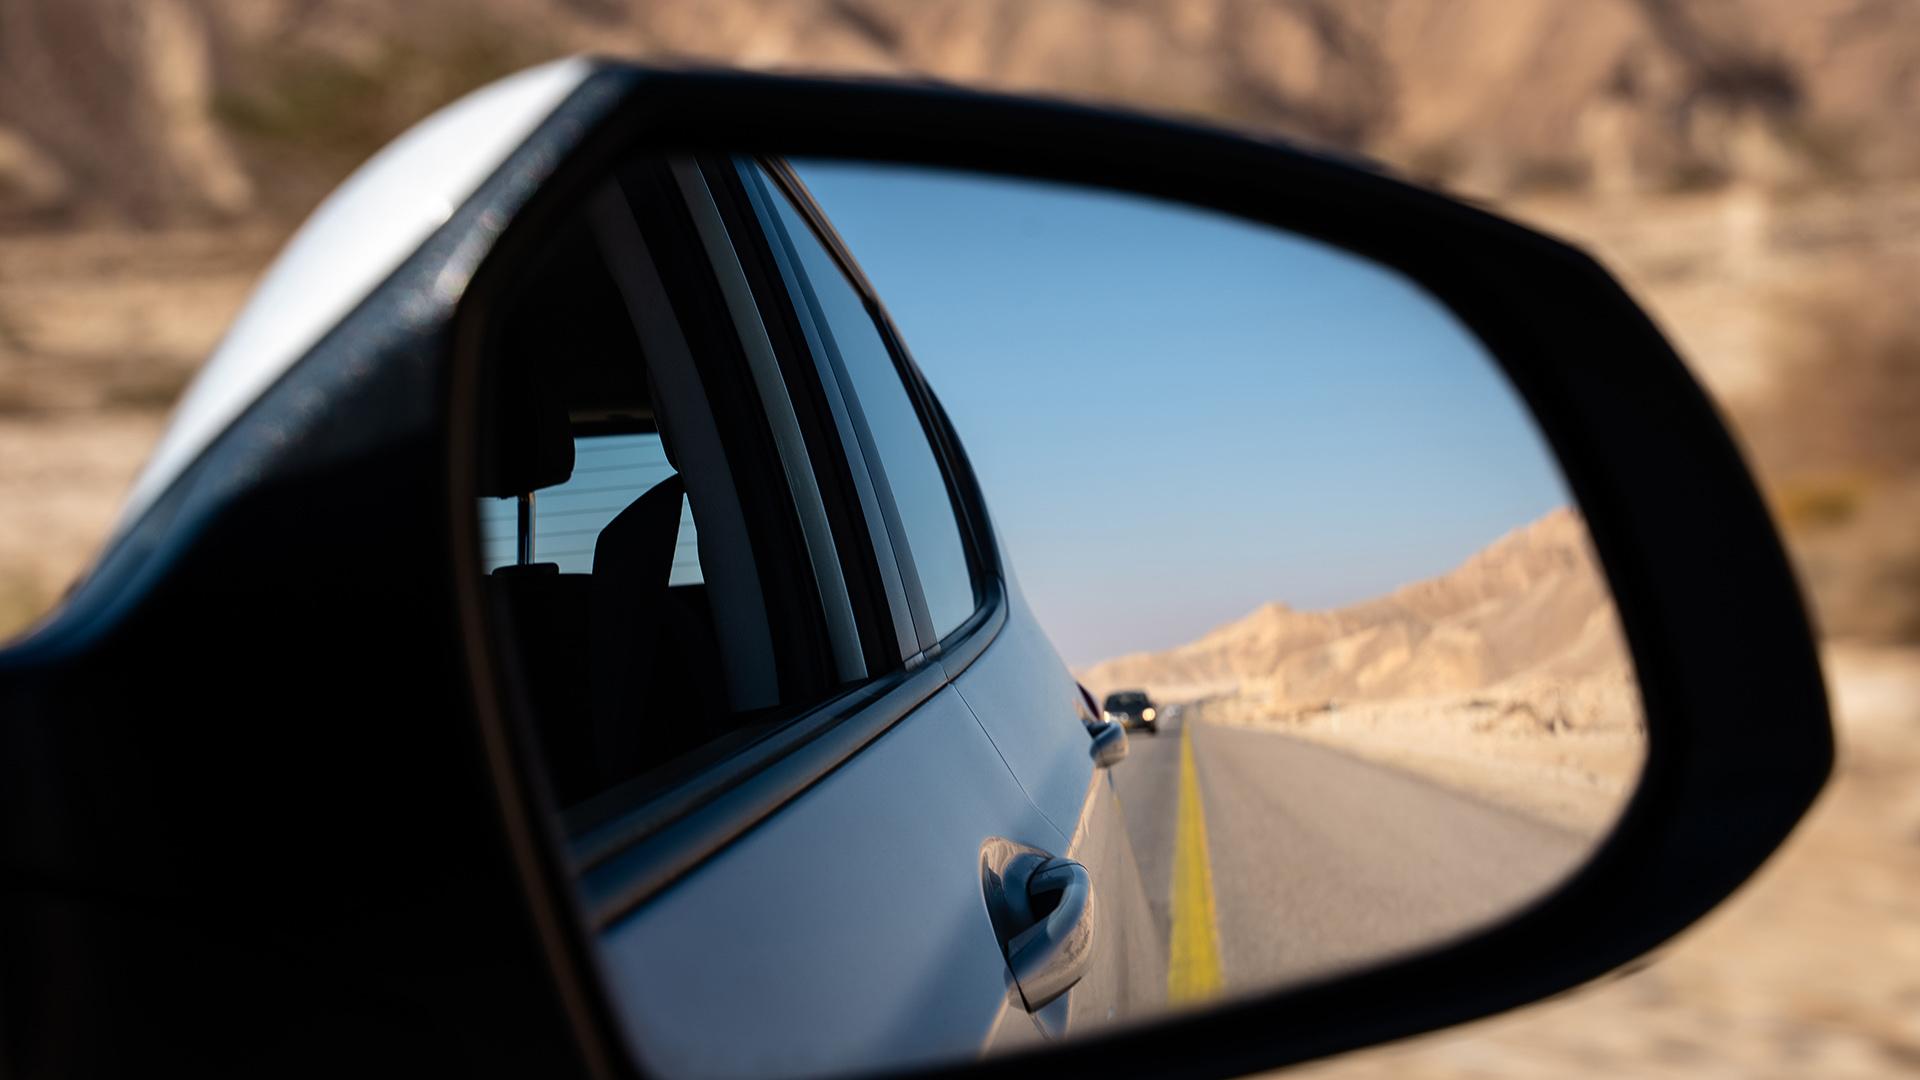 Street, desert and car seen from the rearview mirror